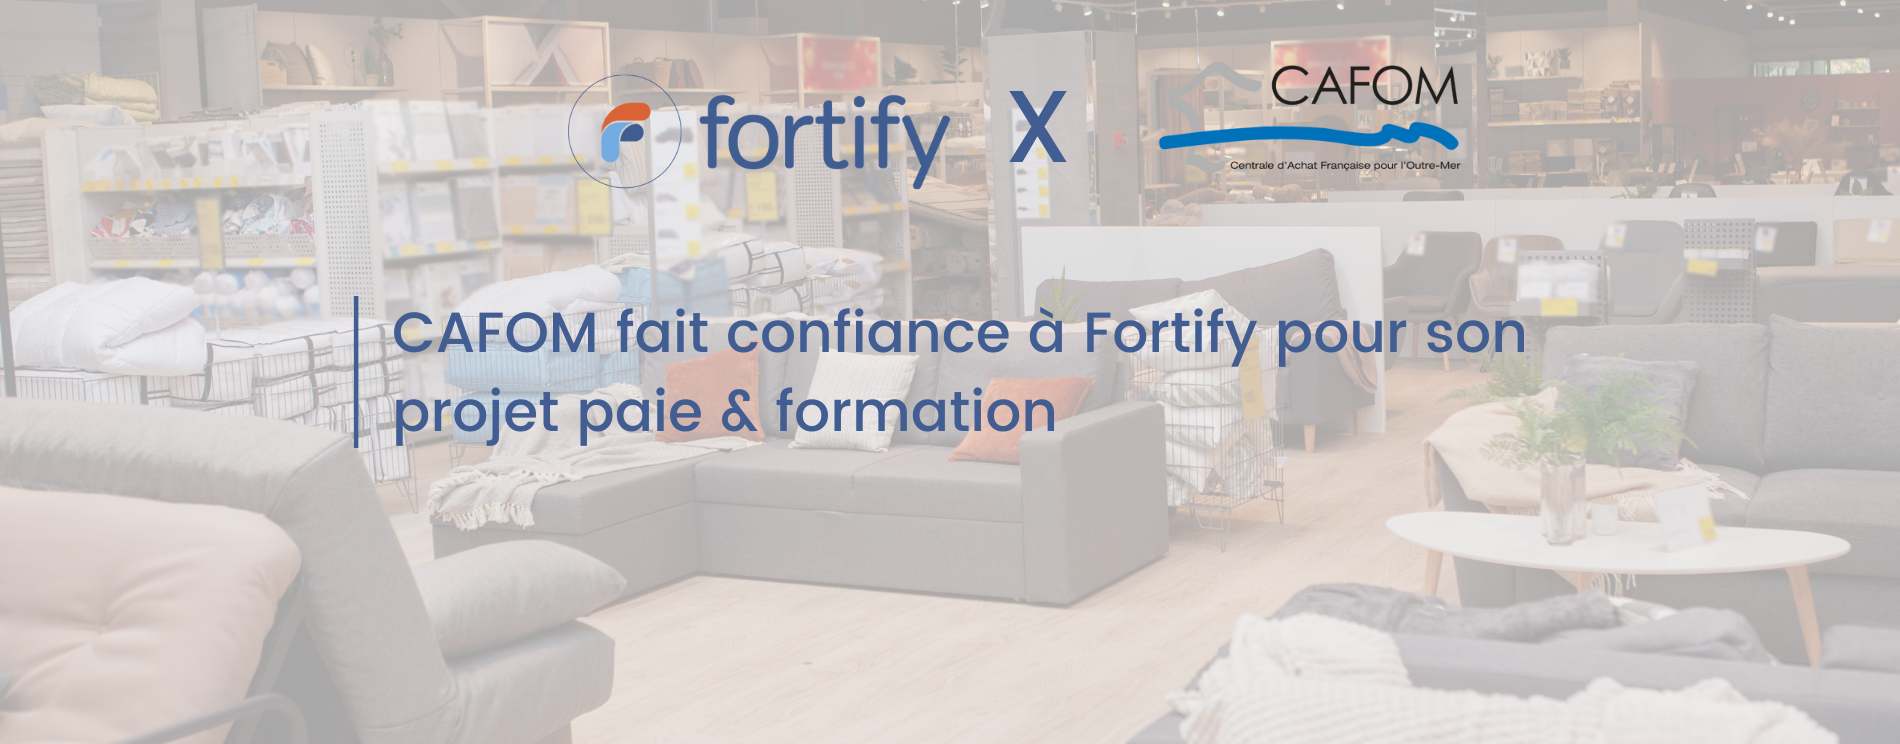 Témoignage client CAFOM Fortify (2)